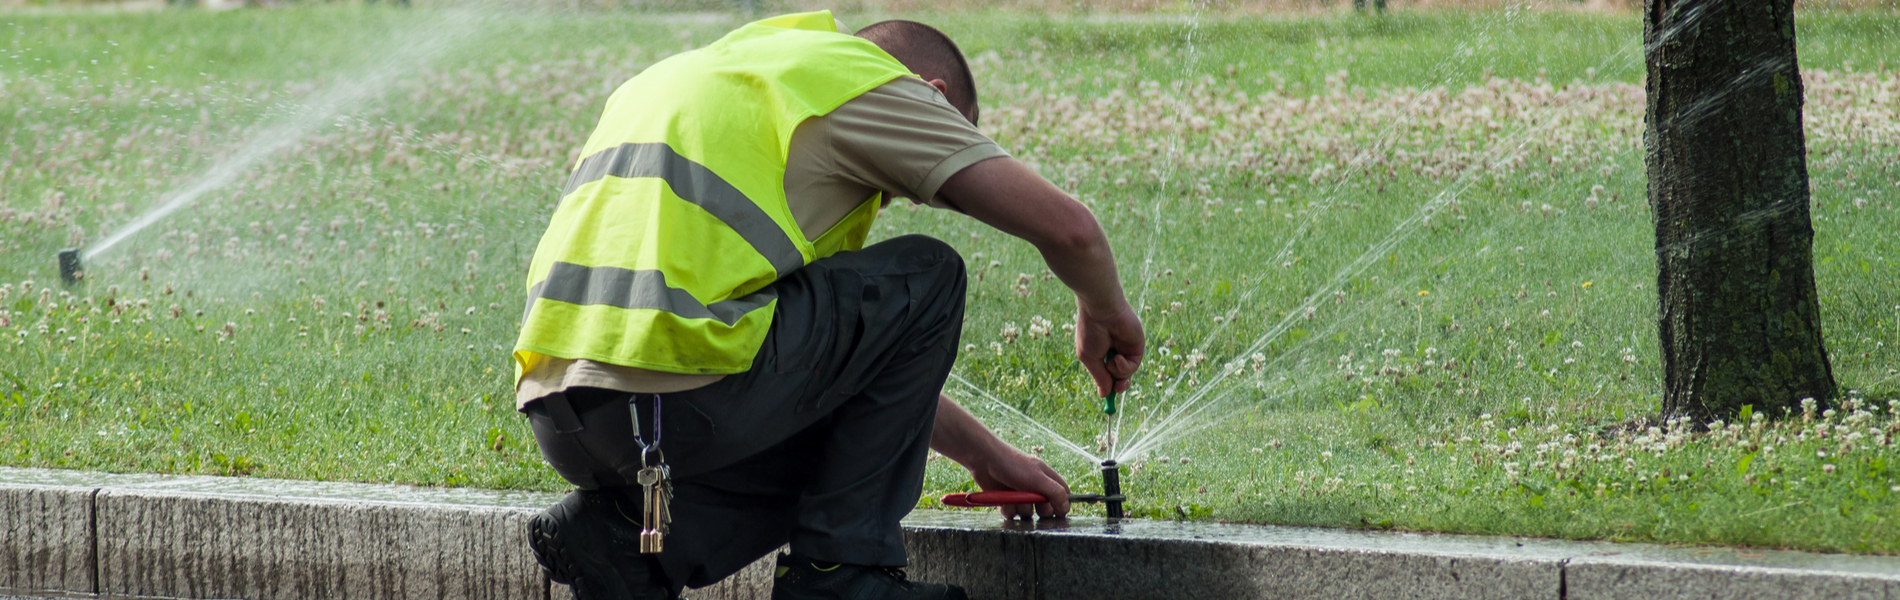 St. Peters, MO irrigation repair | professional St. Peters, MO irrigation repair services | Lawn Sprinklers St. Louis